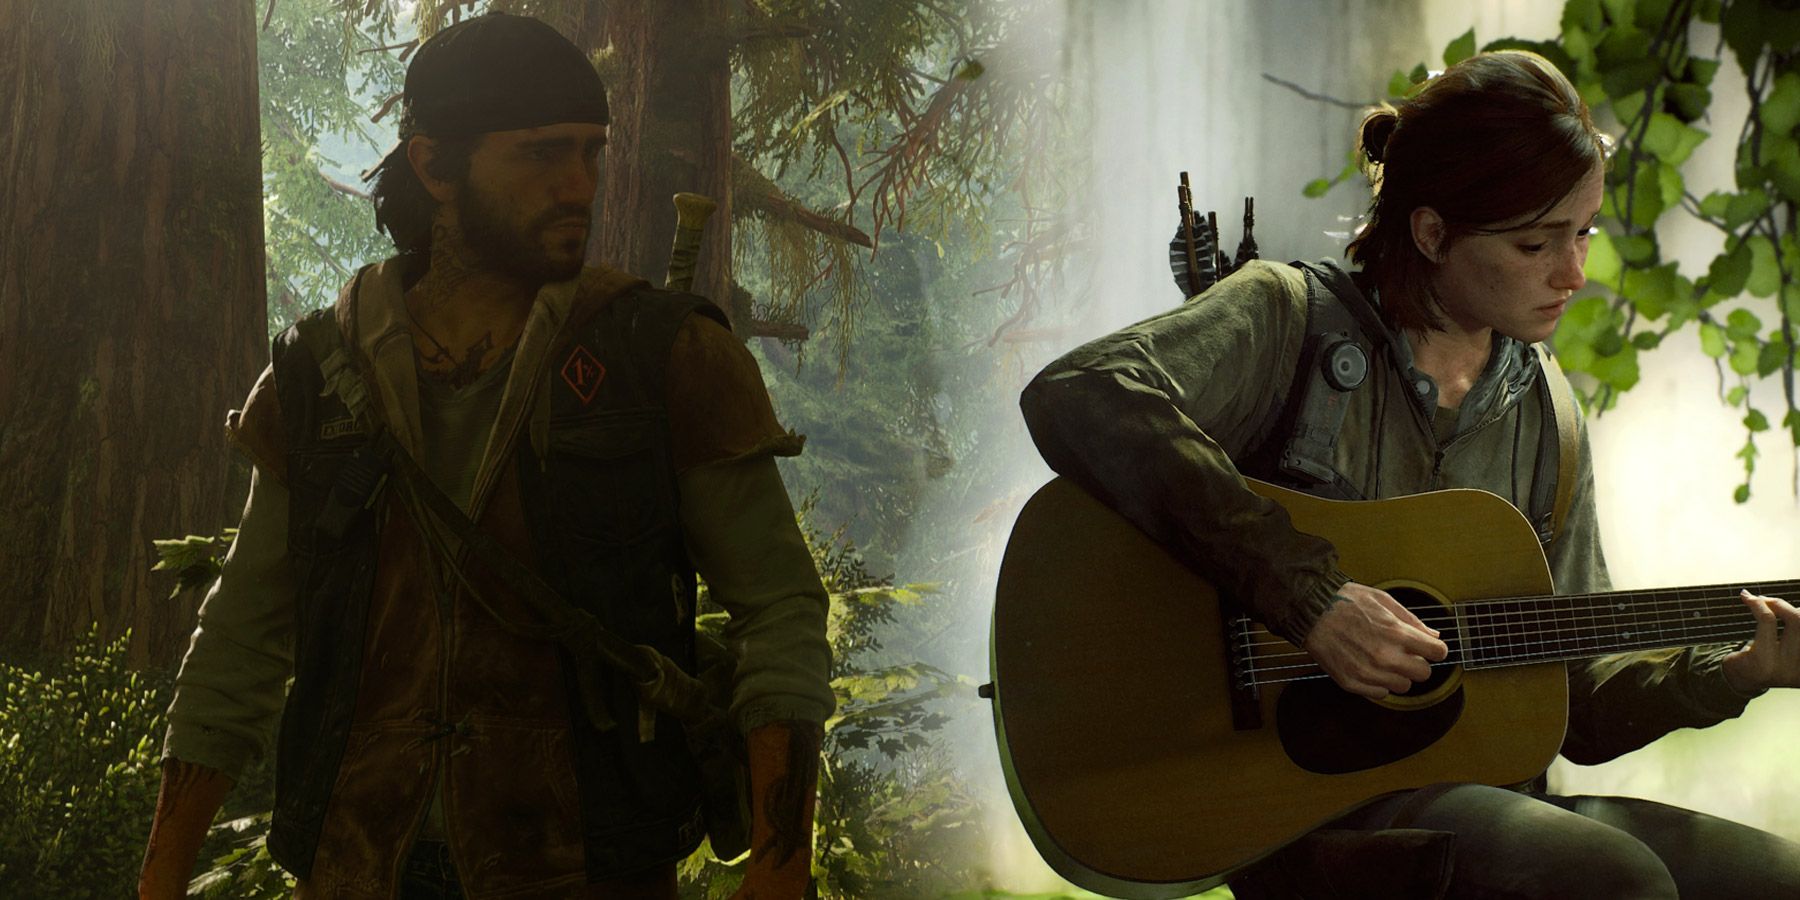 Naughty Dog S The Last Of Us Multiplayer Game Could Take Inspiration From Days Gone S Camps